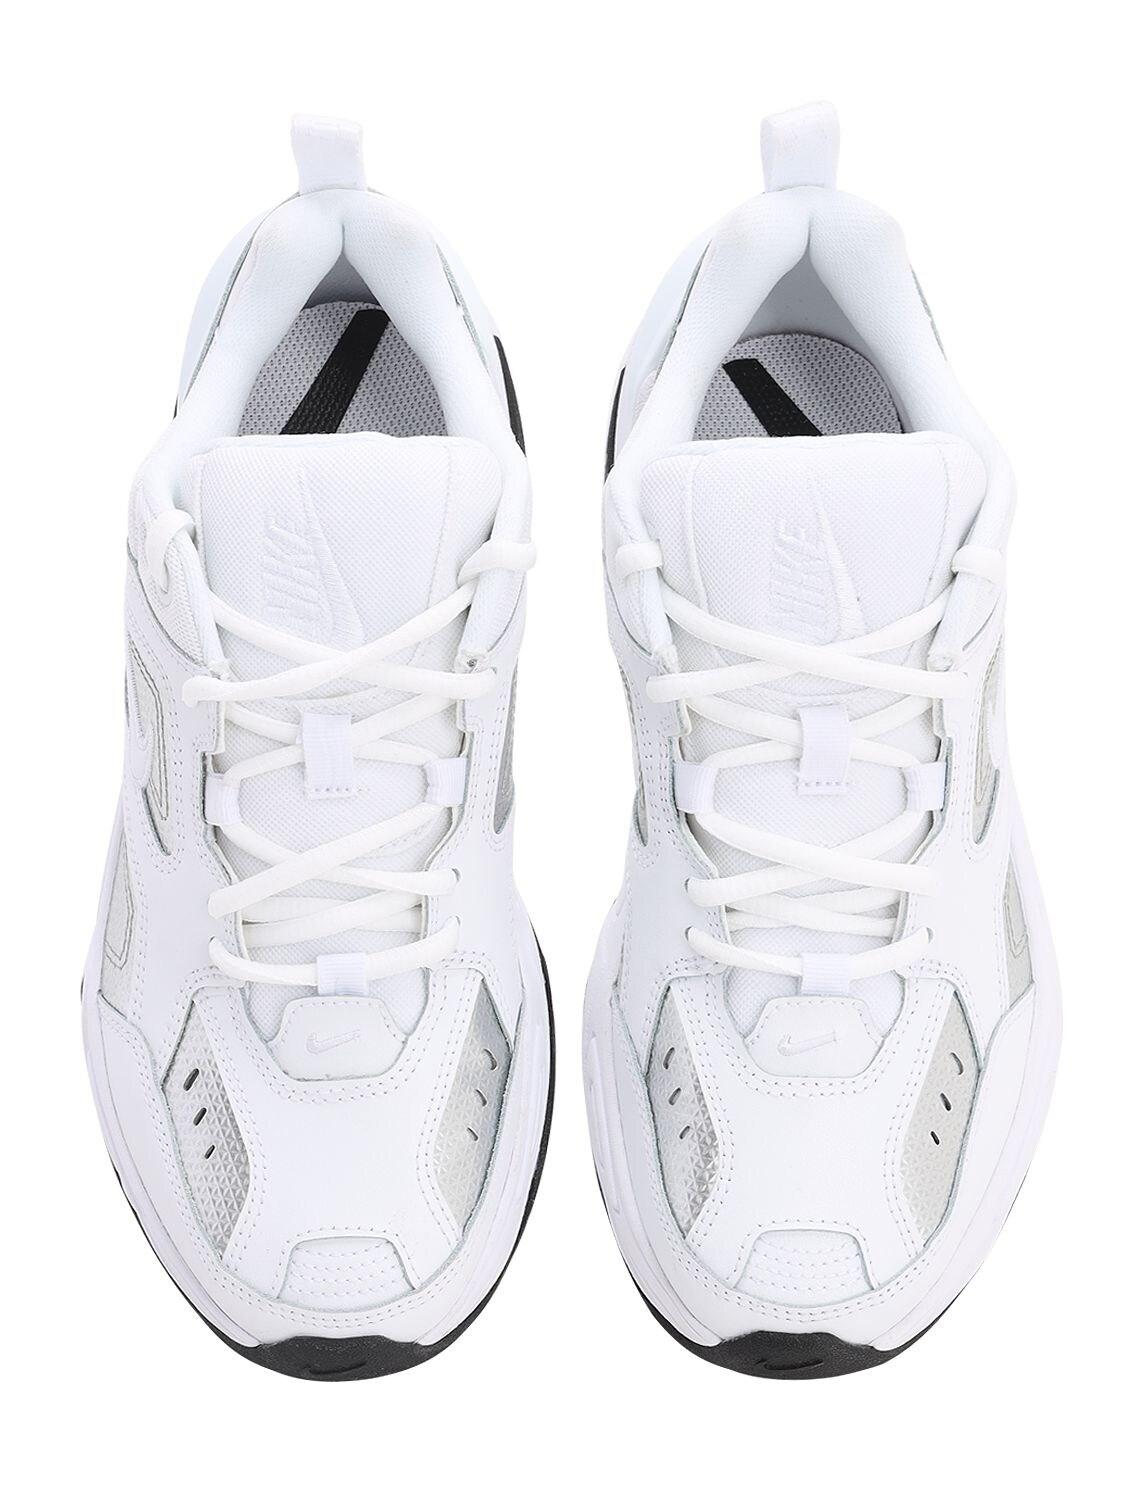 Nike Leather White & Silver M2k Tekno Trainers | Lyst